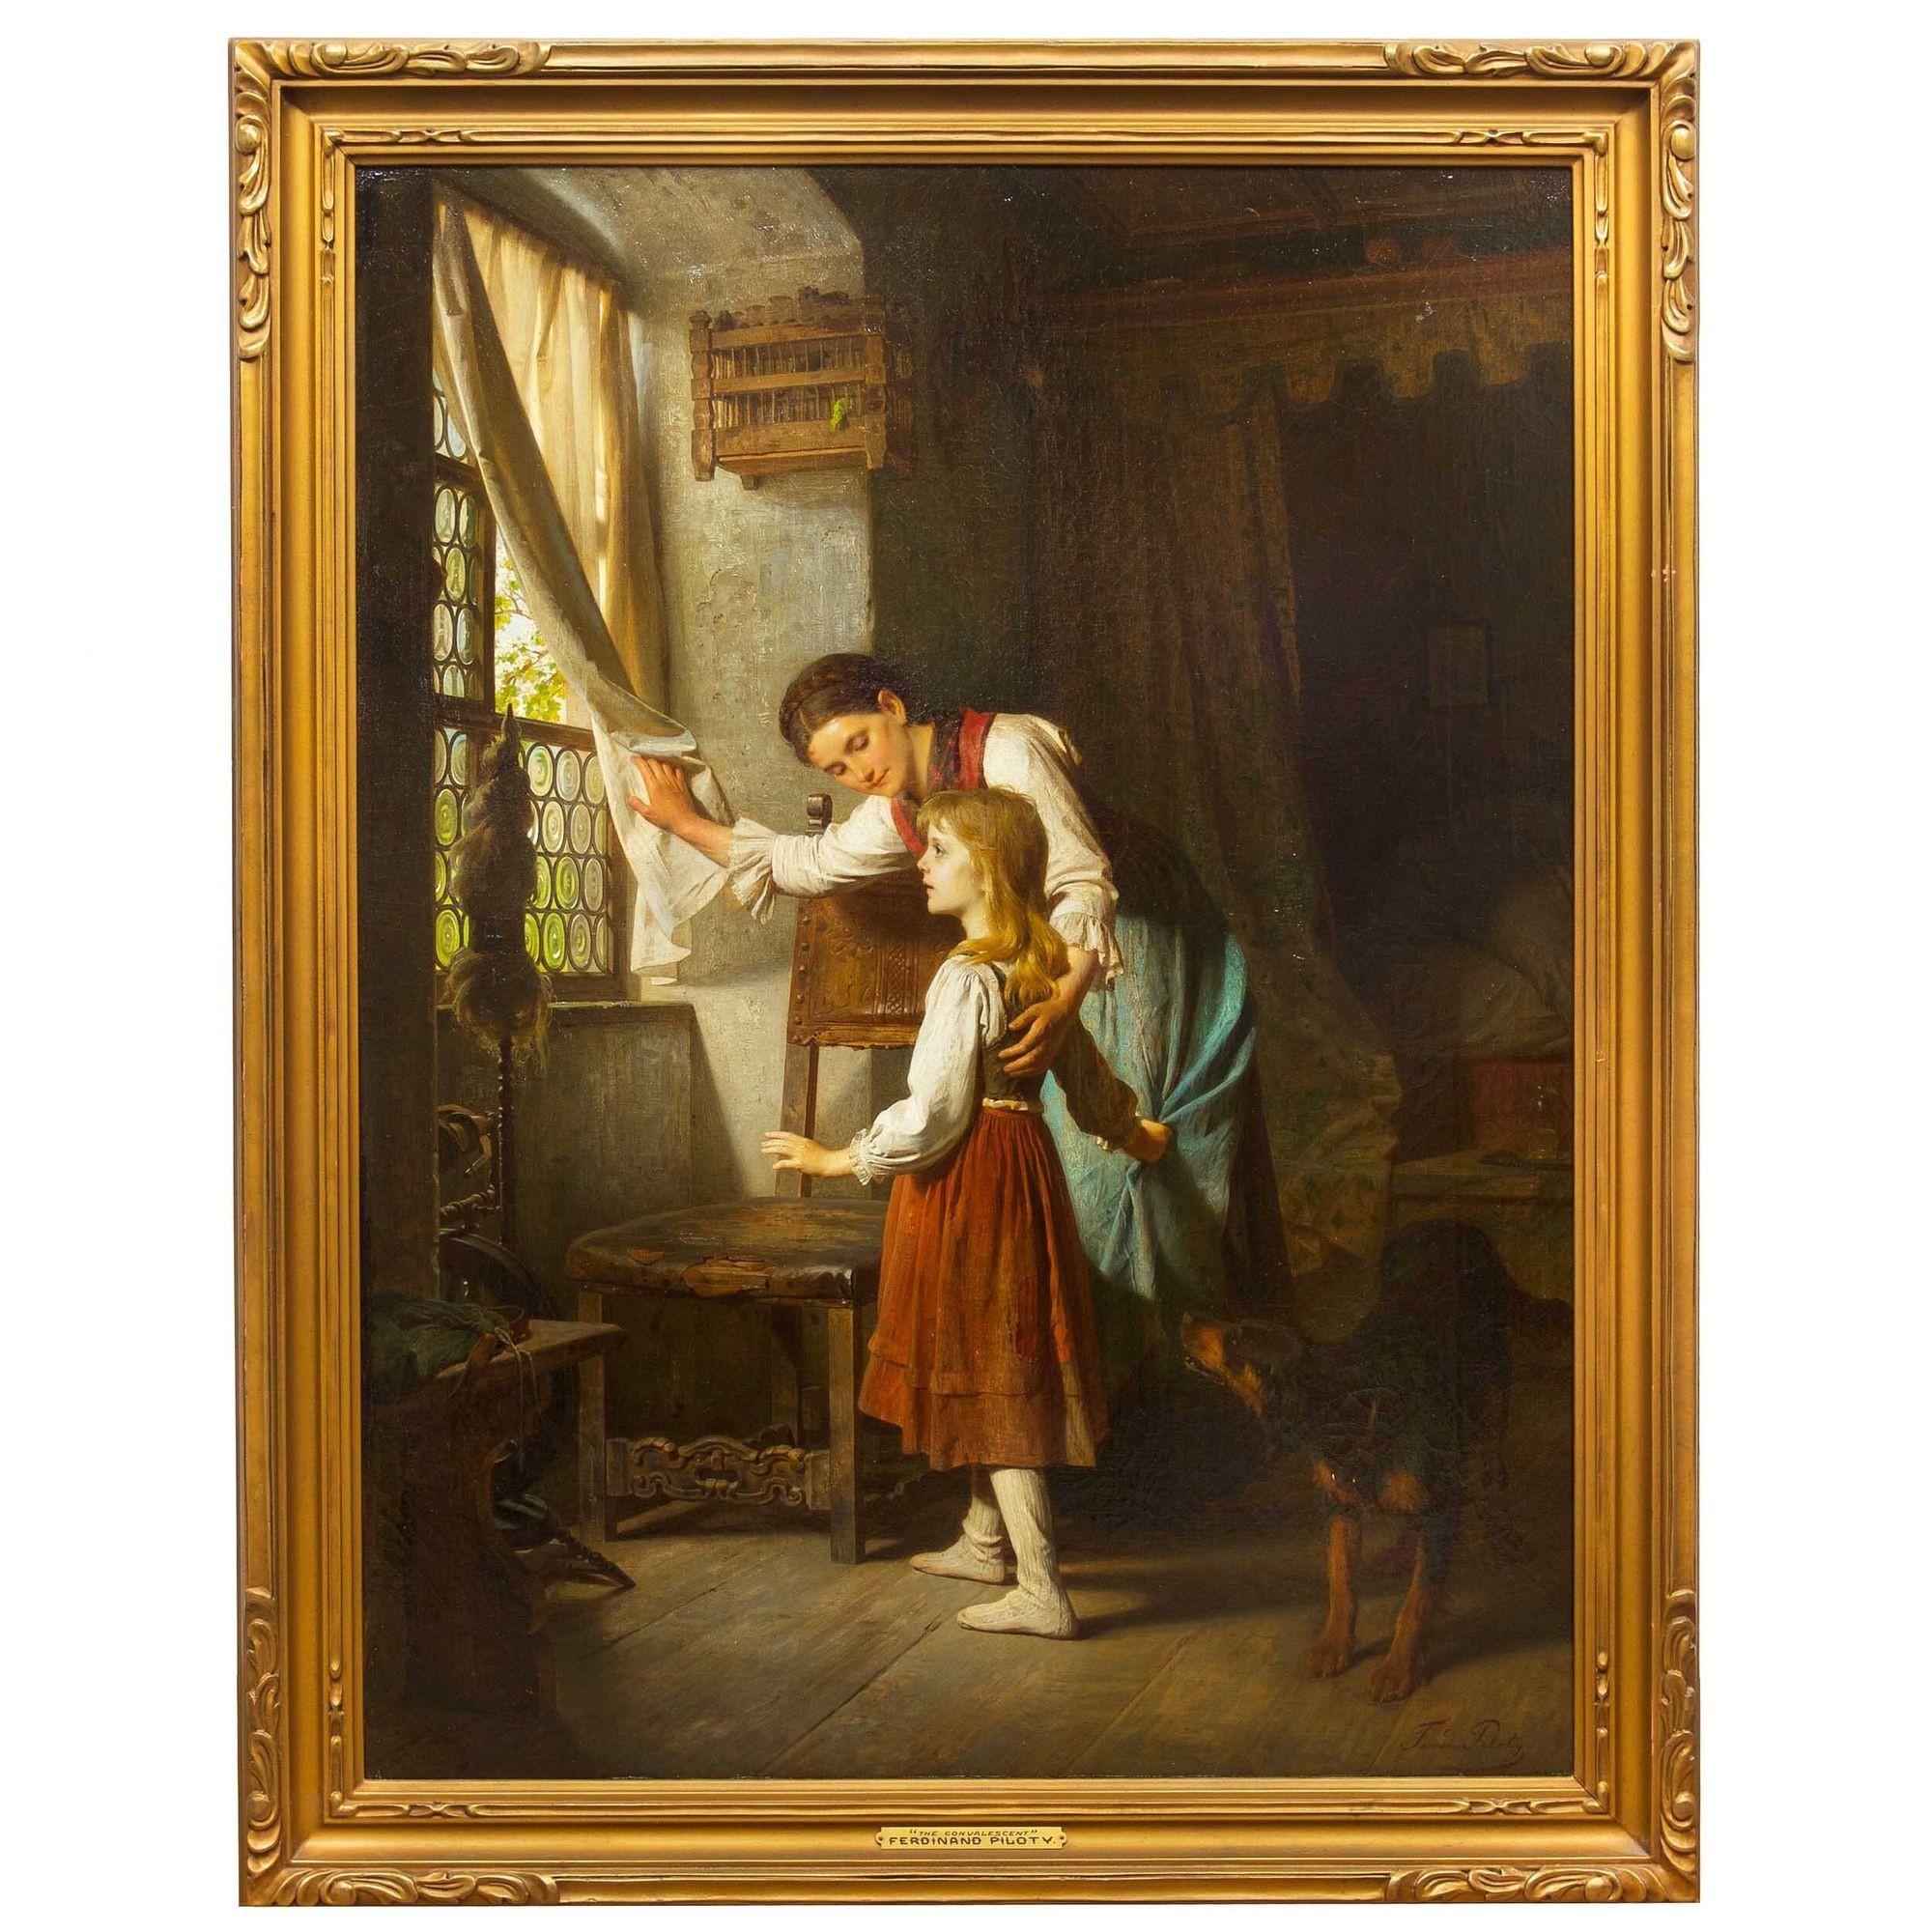 An endearing scene rich with detail of the era, this exquisite genre painting by Ferdinand Piloty II captures the story of a sick young girl finding the strength to out of bed and look out into the brilliant sunlight pouring through her windows. Her